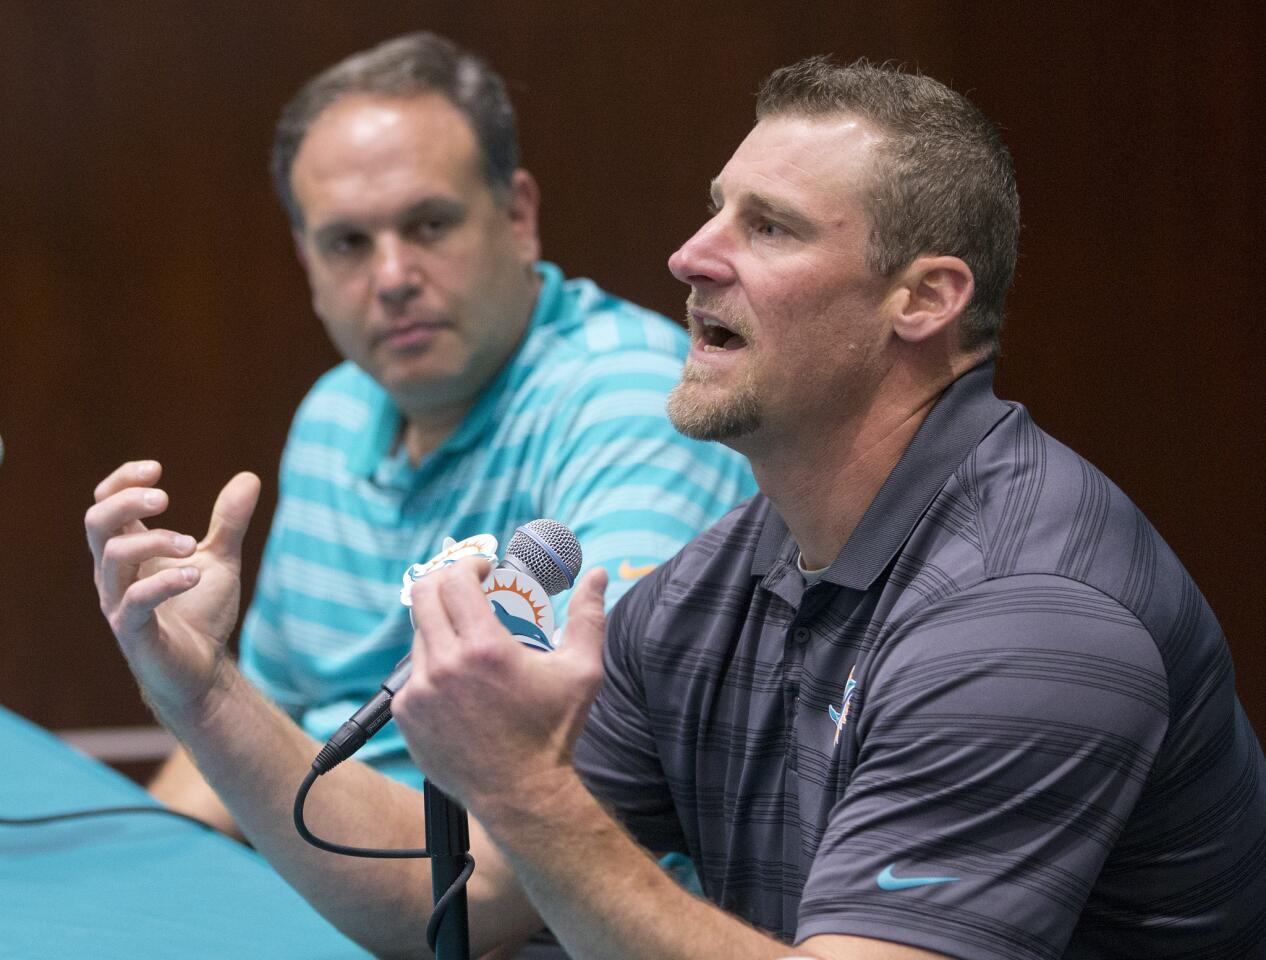 Former Miami Dolphins tight ends coach Dan Campbell, foreground, gestures as he speaks during a news conference after being promoted to interim head coach, Monday, Oct. 5, 2015 in Davie, Fla. At rear is Mike Tannenbaum, left, Miami Dolphins executive vice president of football operations. Joe Philbin has been fired four games into his fourth season as coach of the Miami Dolphins, and one day after a flop on an international stage that helped to seal his fate. (AP Photo/Wilfredo Lee)